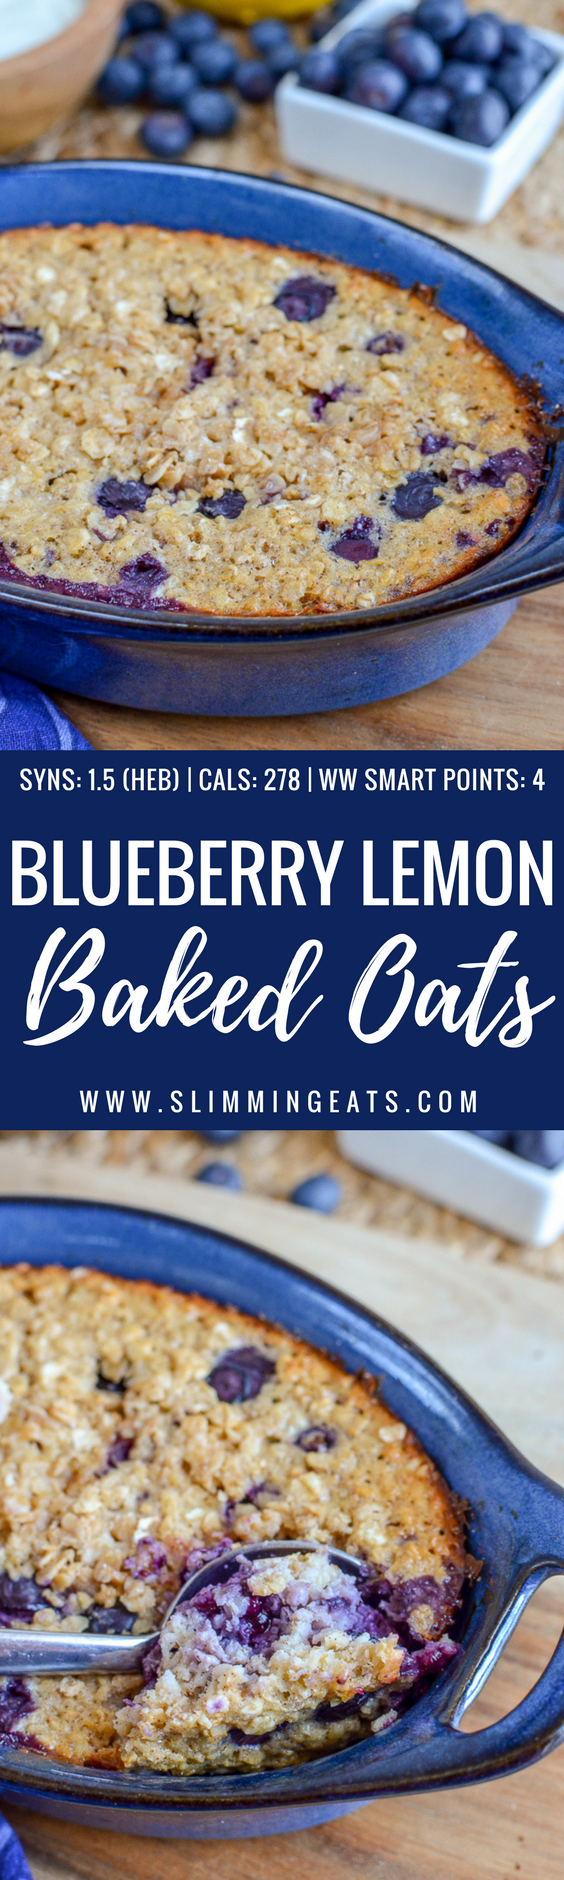 Start your morning with a dish of this delicious Blueberry and Lemon Baked Oats | www.SlimmingEats.com